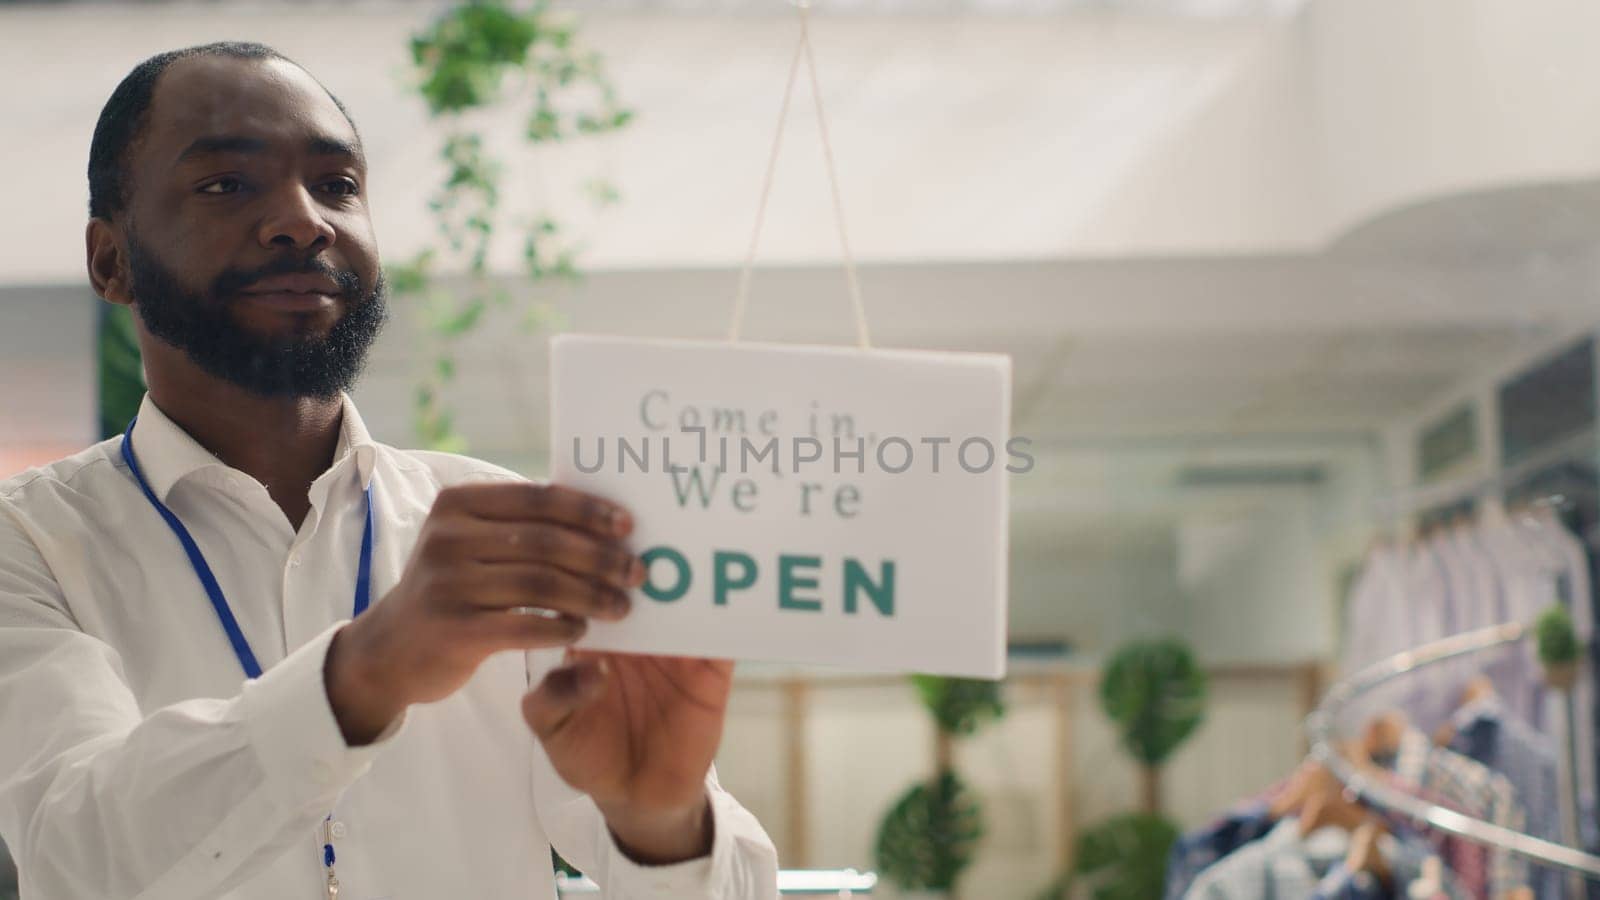 African american man opening fashion boutique business, starting shift in the morning. Smiling retailer turning closed sign on fast fashion clothing store into open one, close up shot